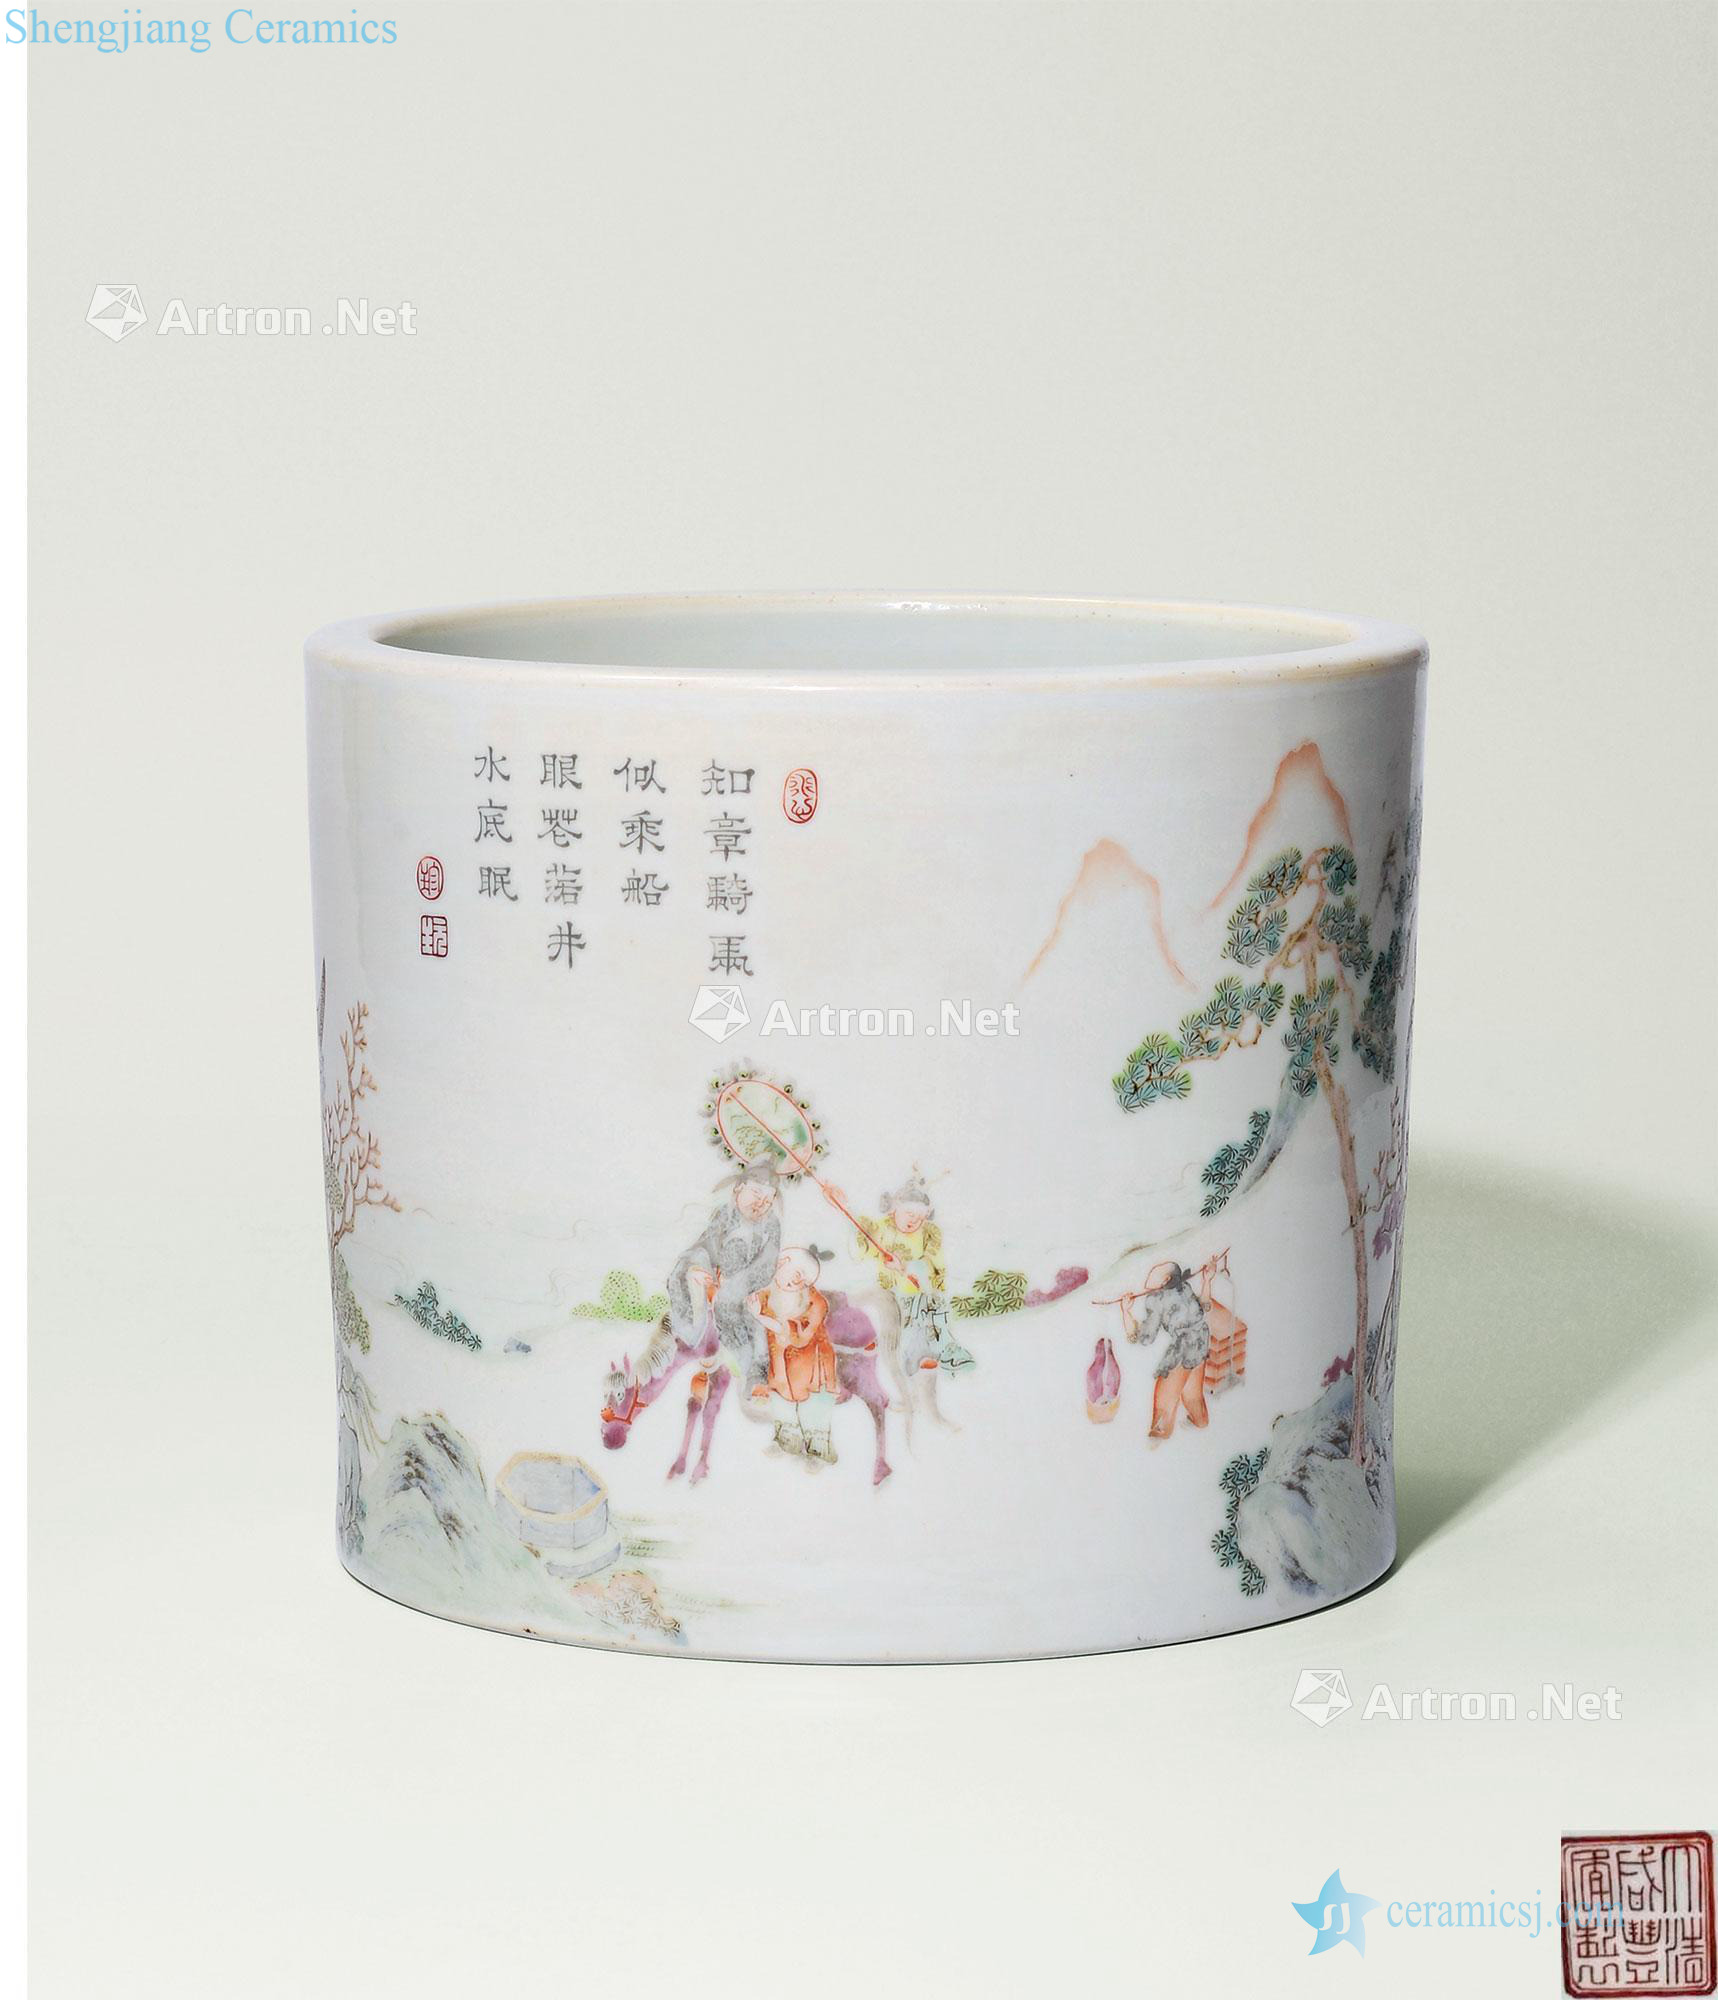 Qing xianfeng pastel "drunk to know chapter" figure pen container